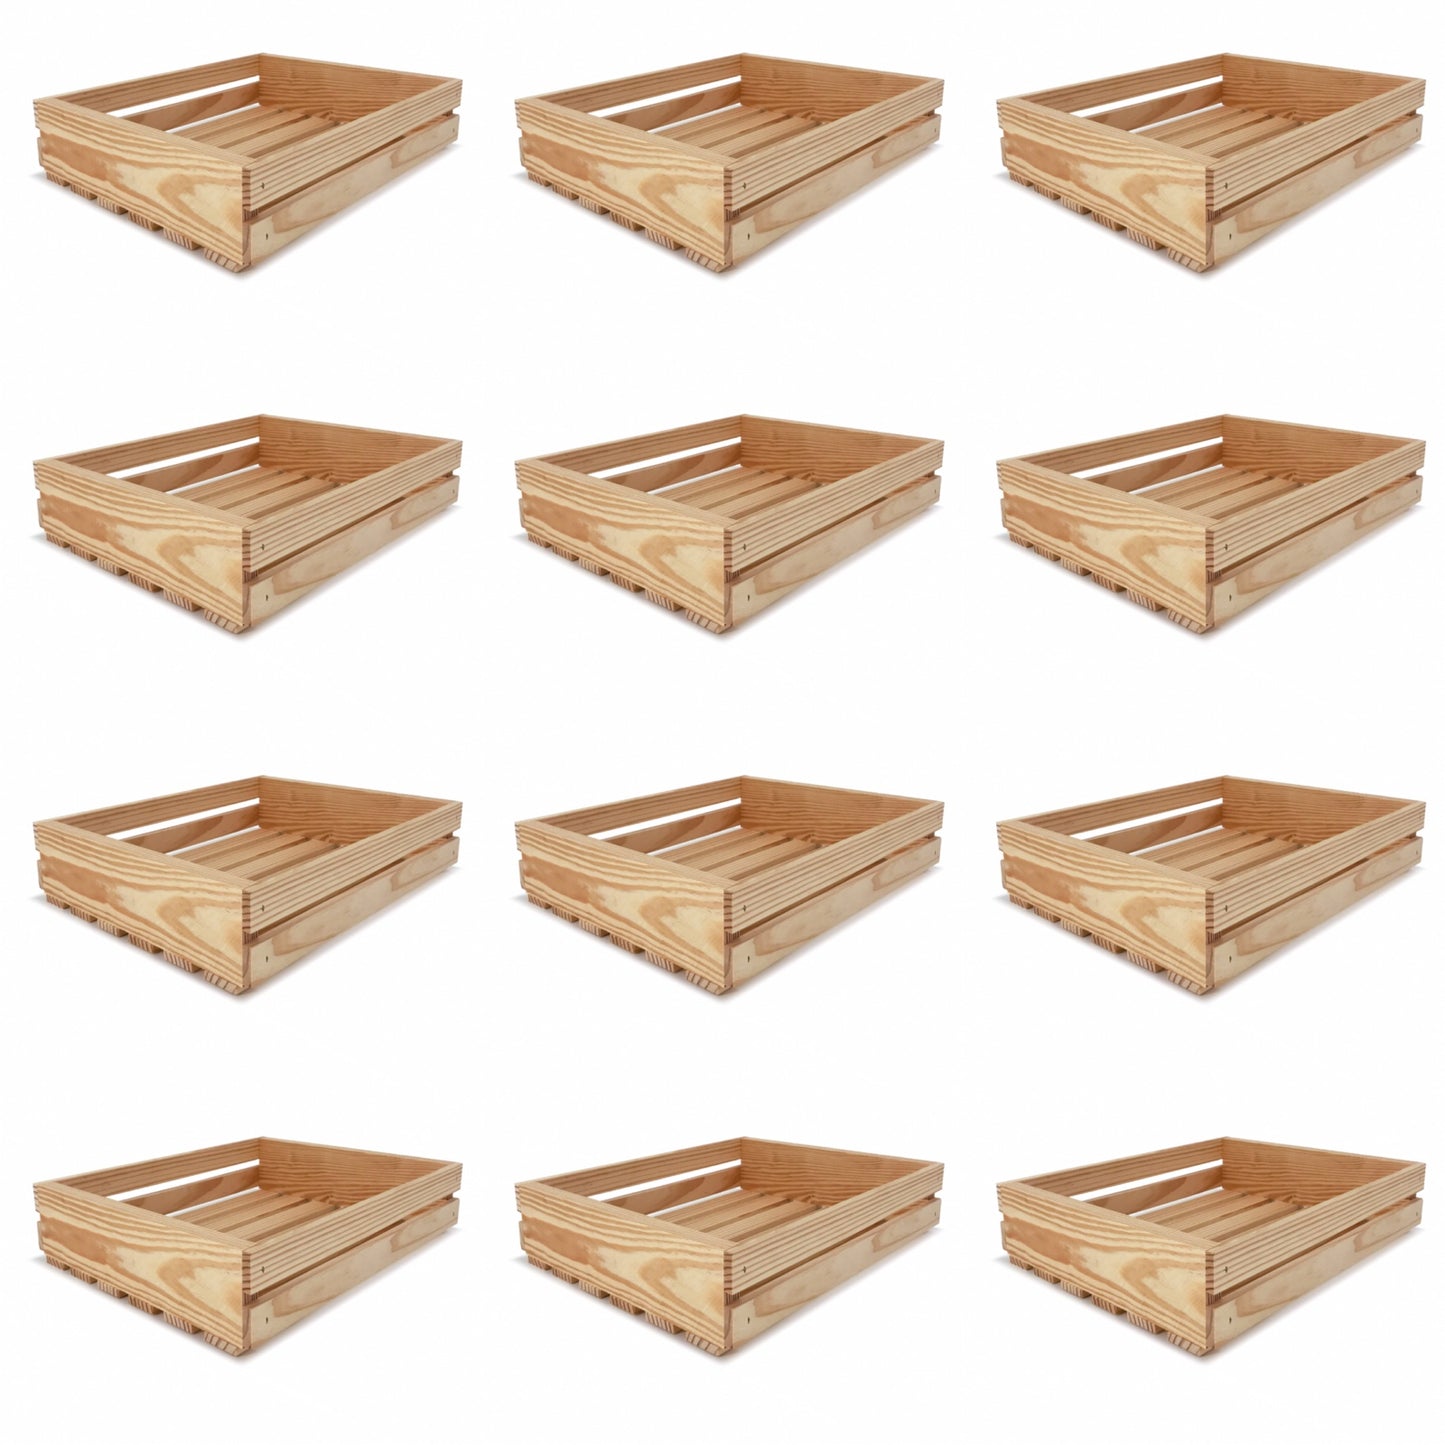 12 Small wooden crates 14x12x3.5